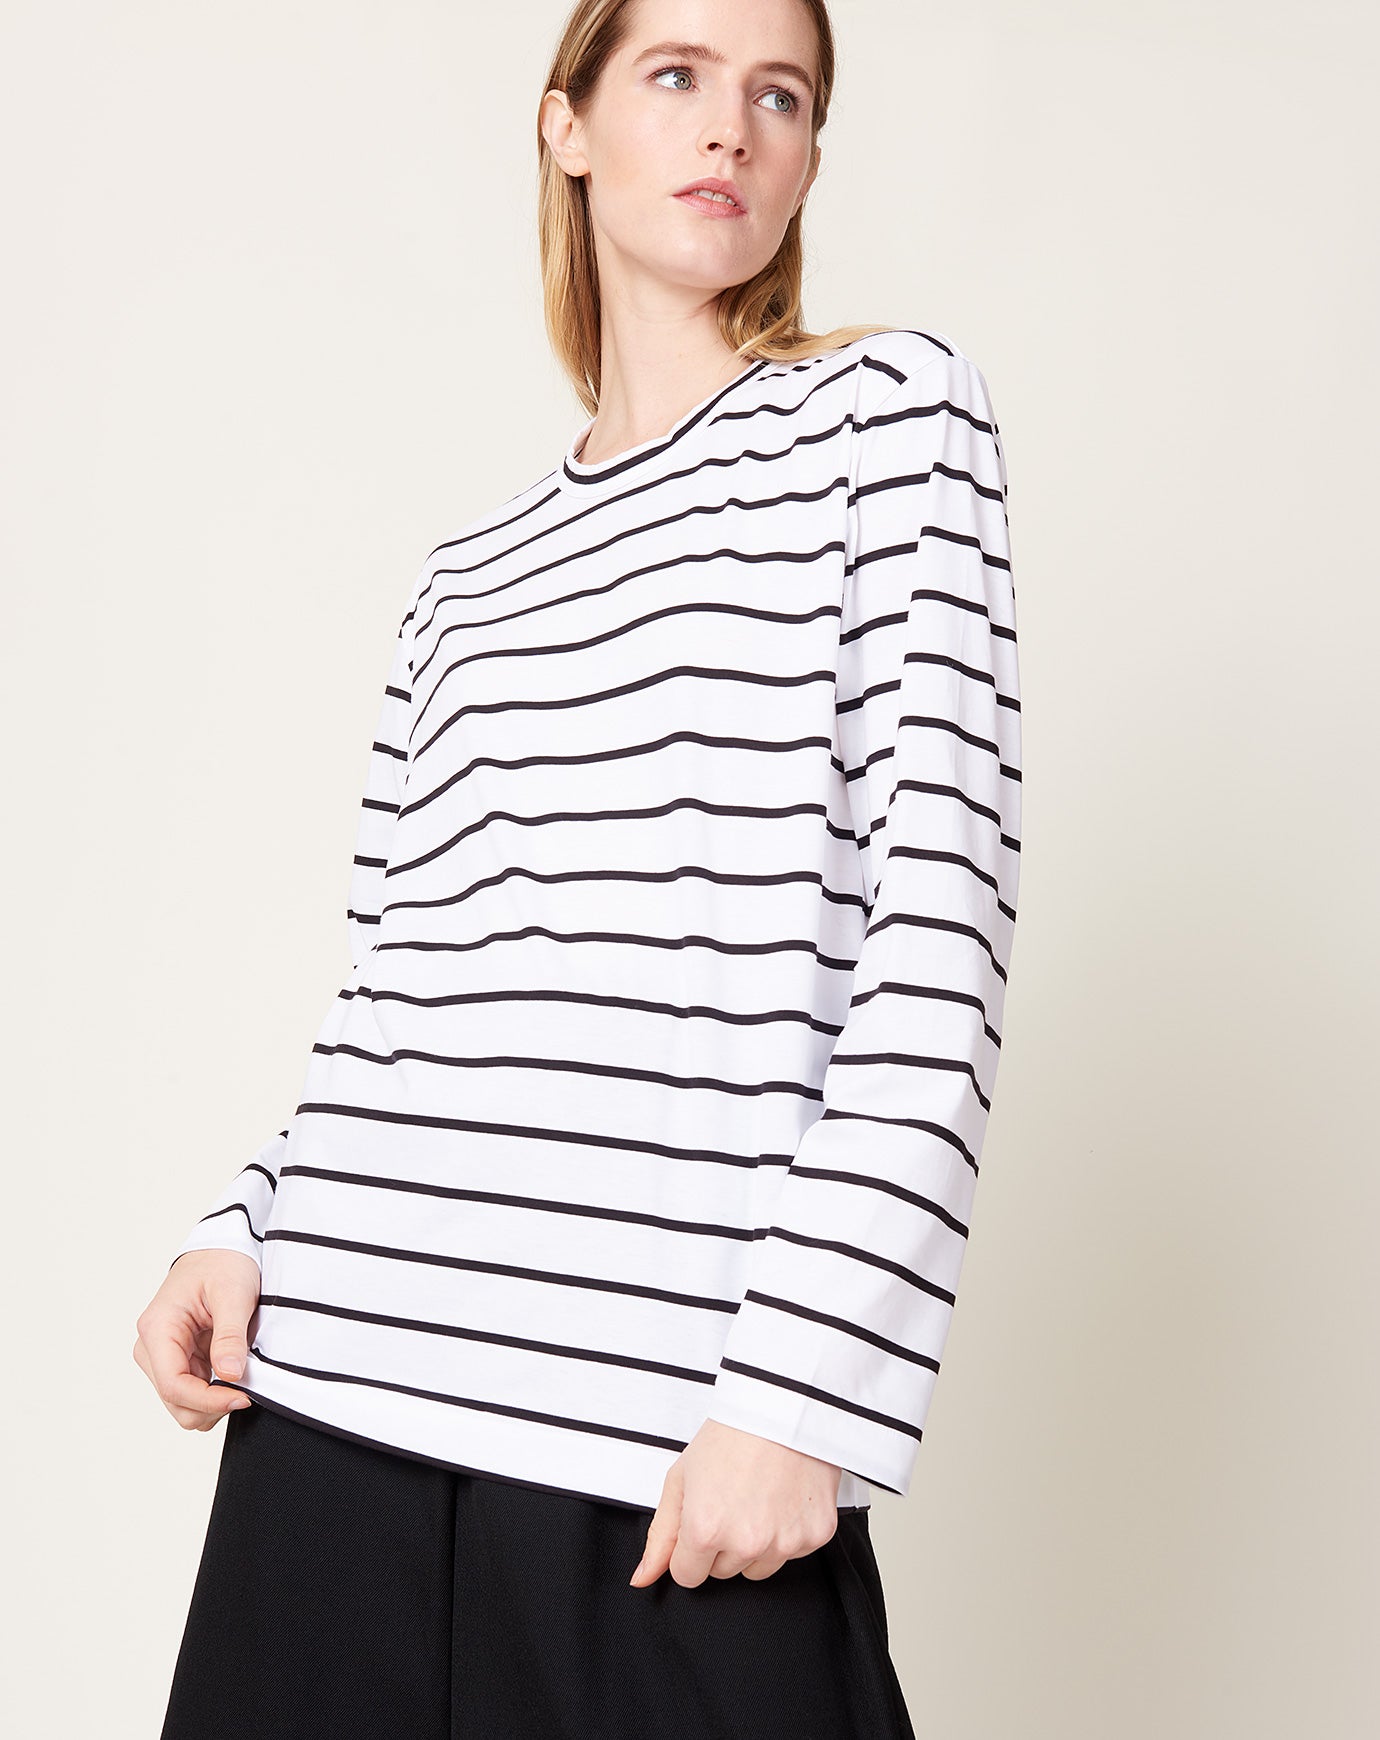 Comme des Garçons Comme des Garçons Cotton Jersey Stripe T Shirt in White and Black